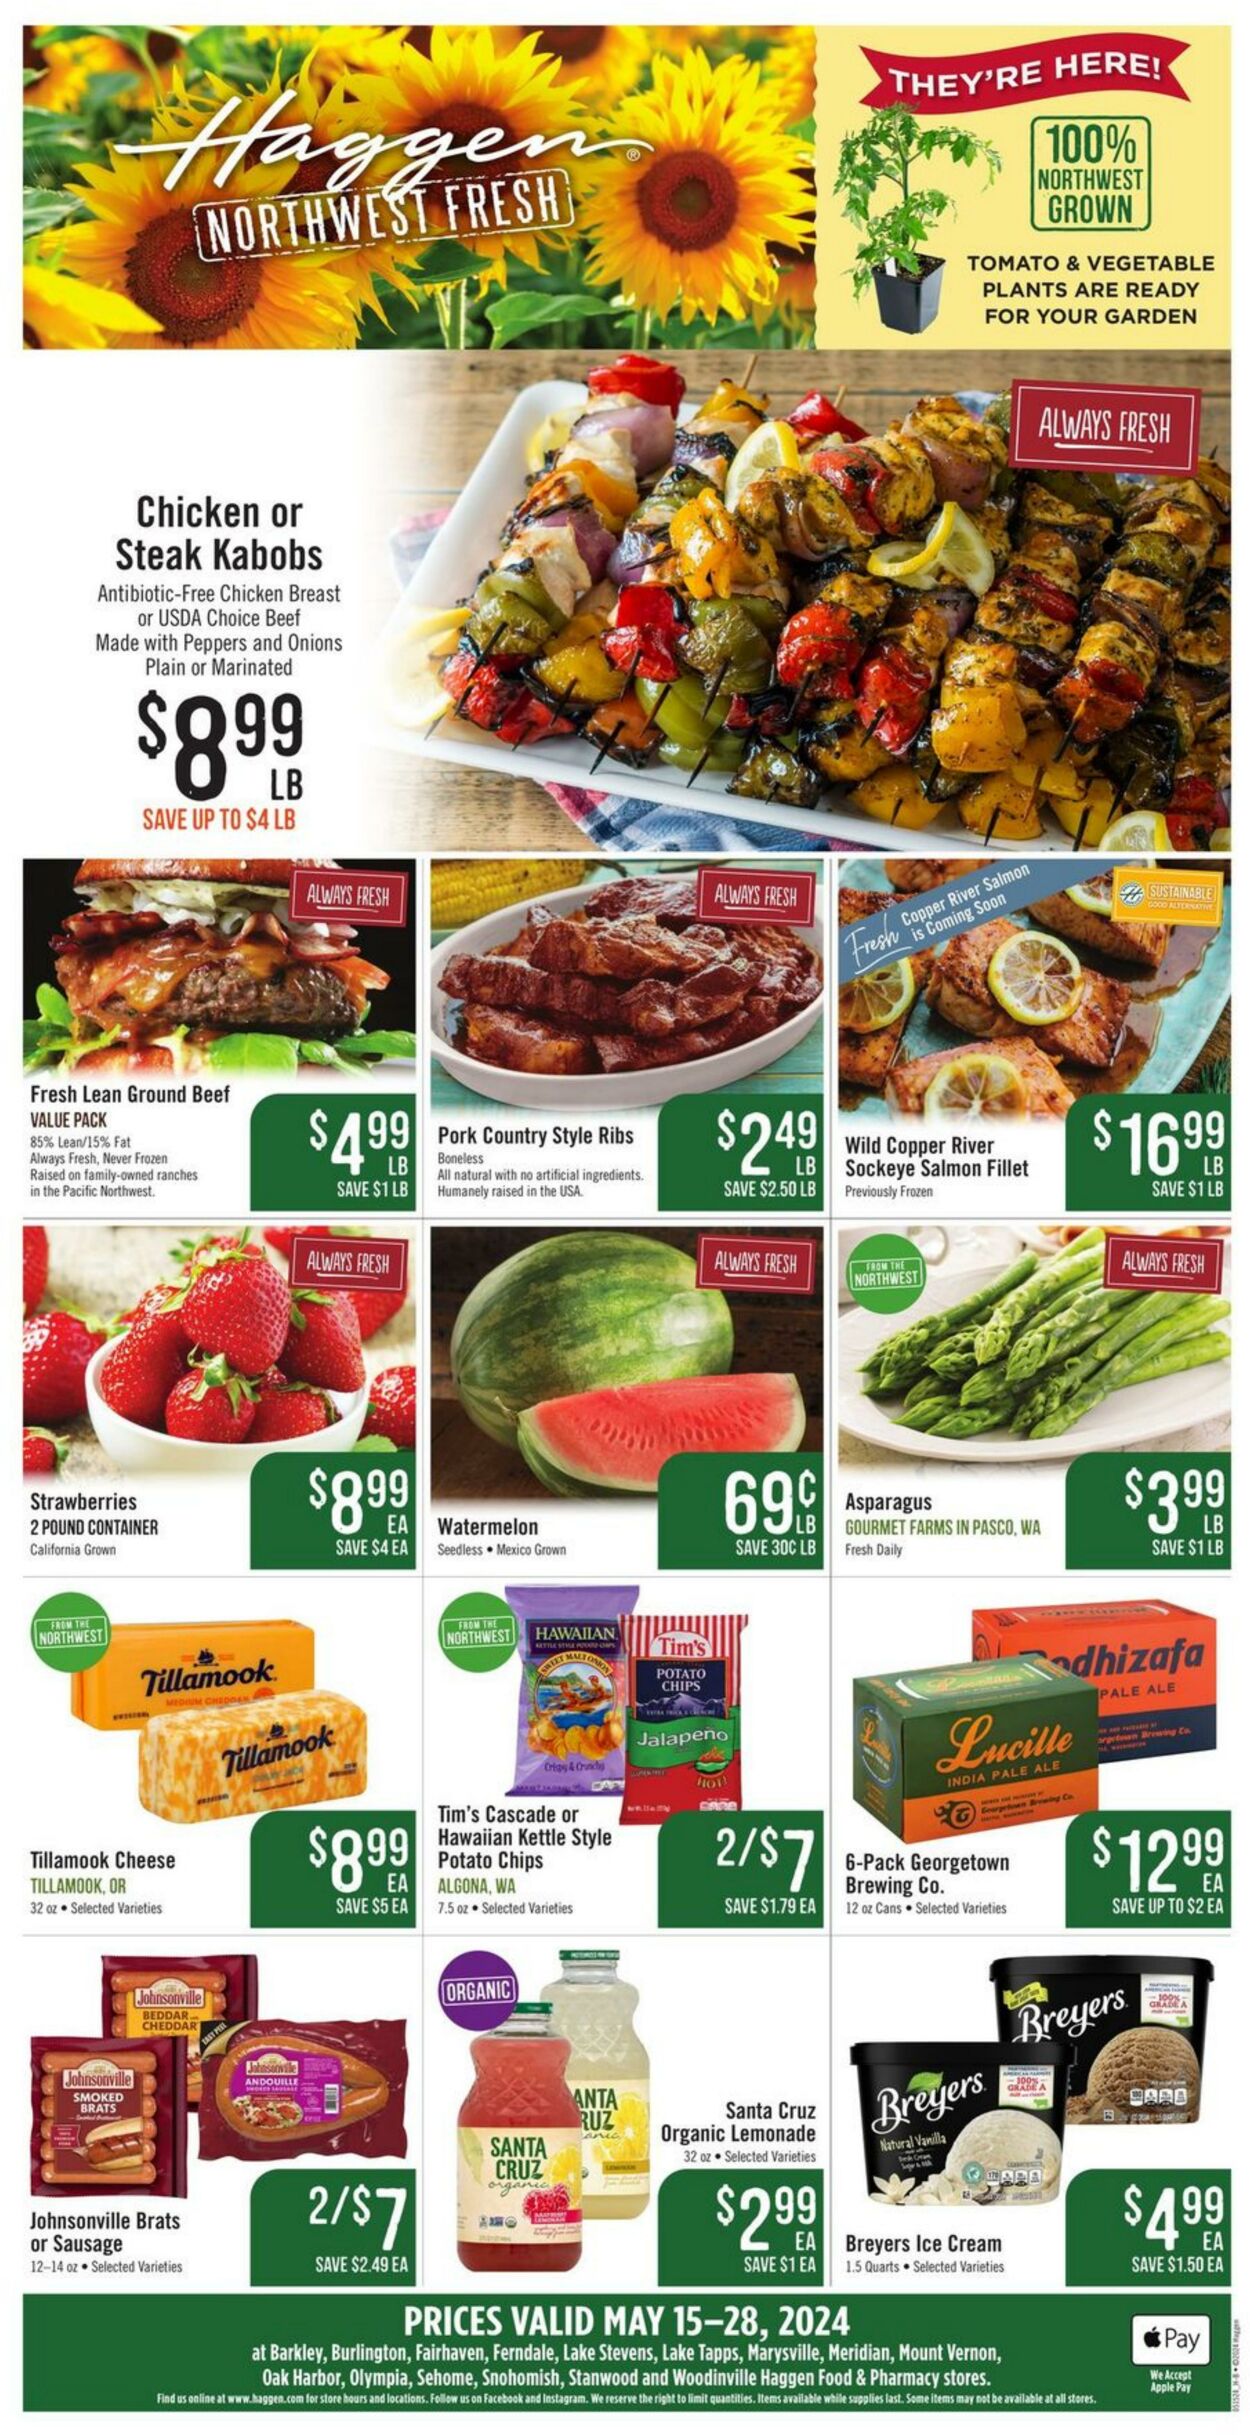 Haggen Promotional weekly ads